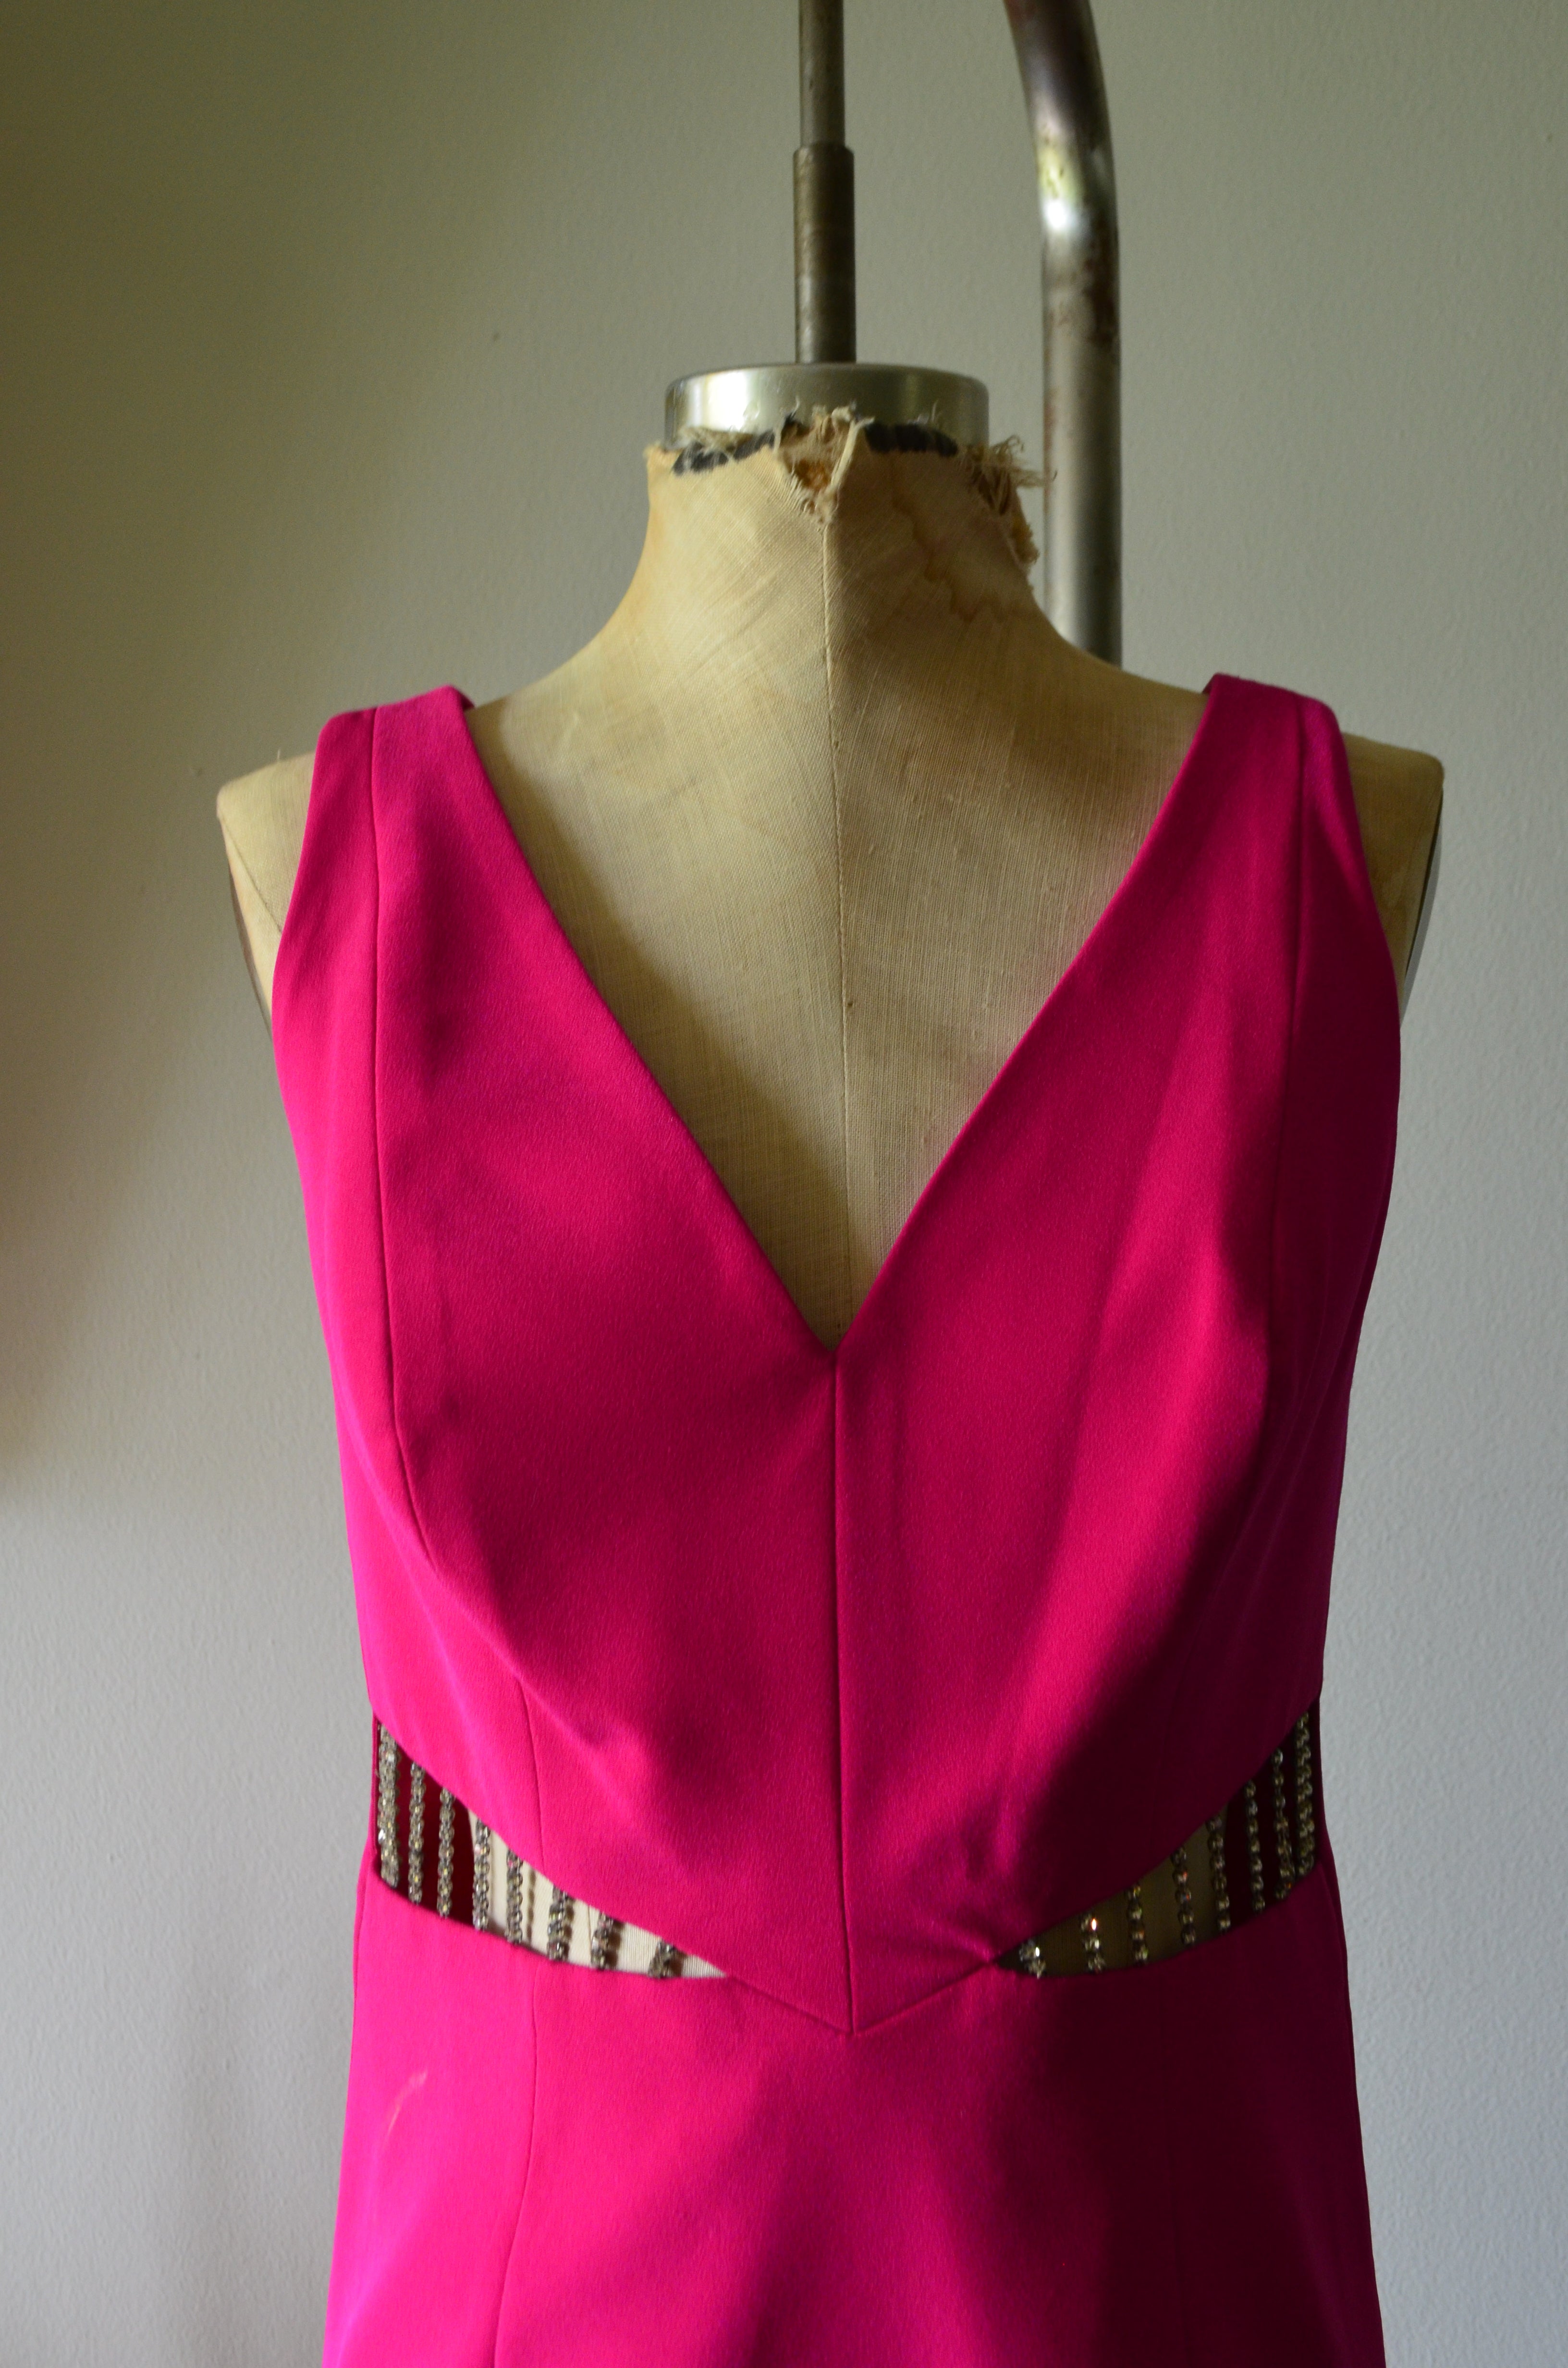 Sexy Pink Feather Dress Fuchsia Empire Waist Open Front Crystal Chain